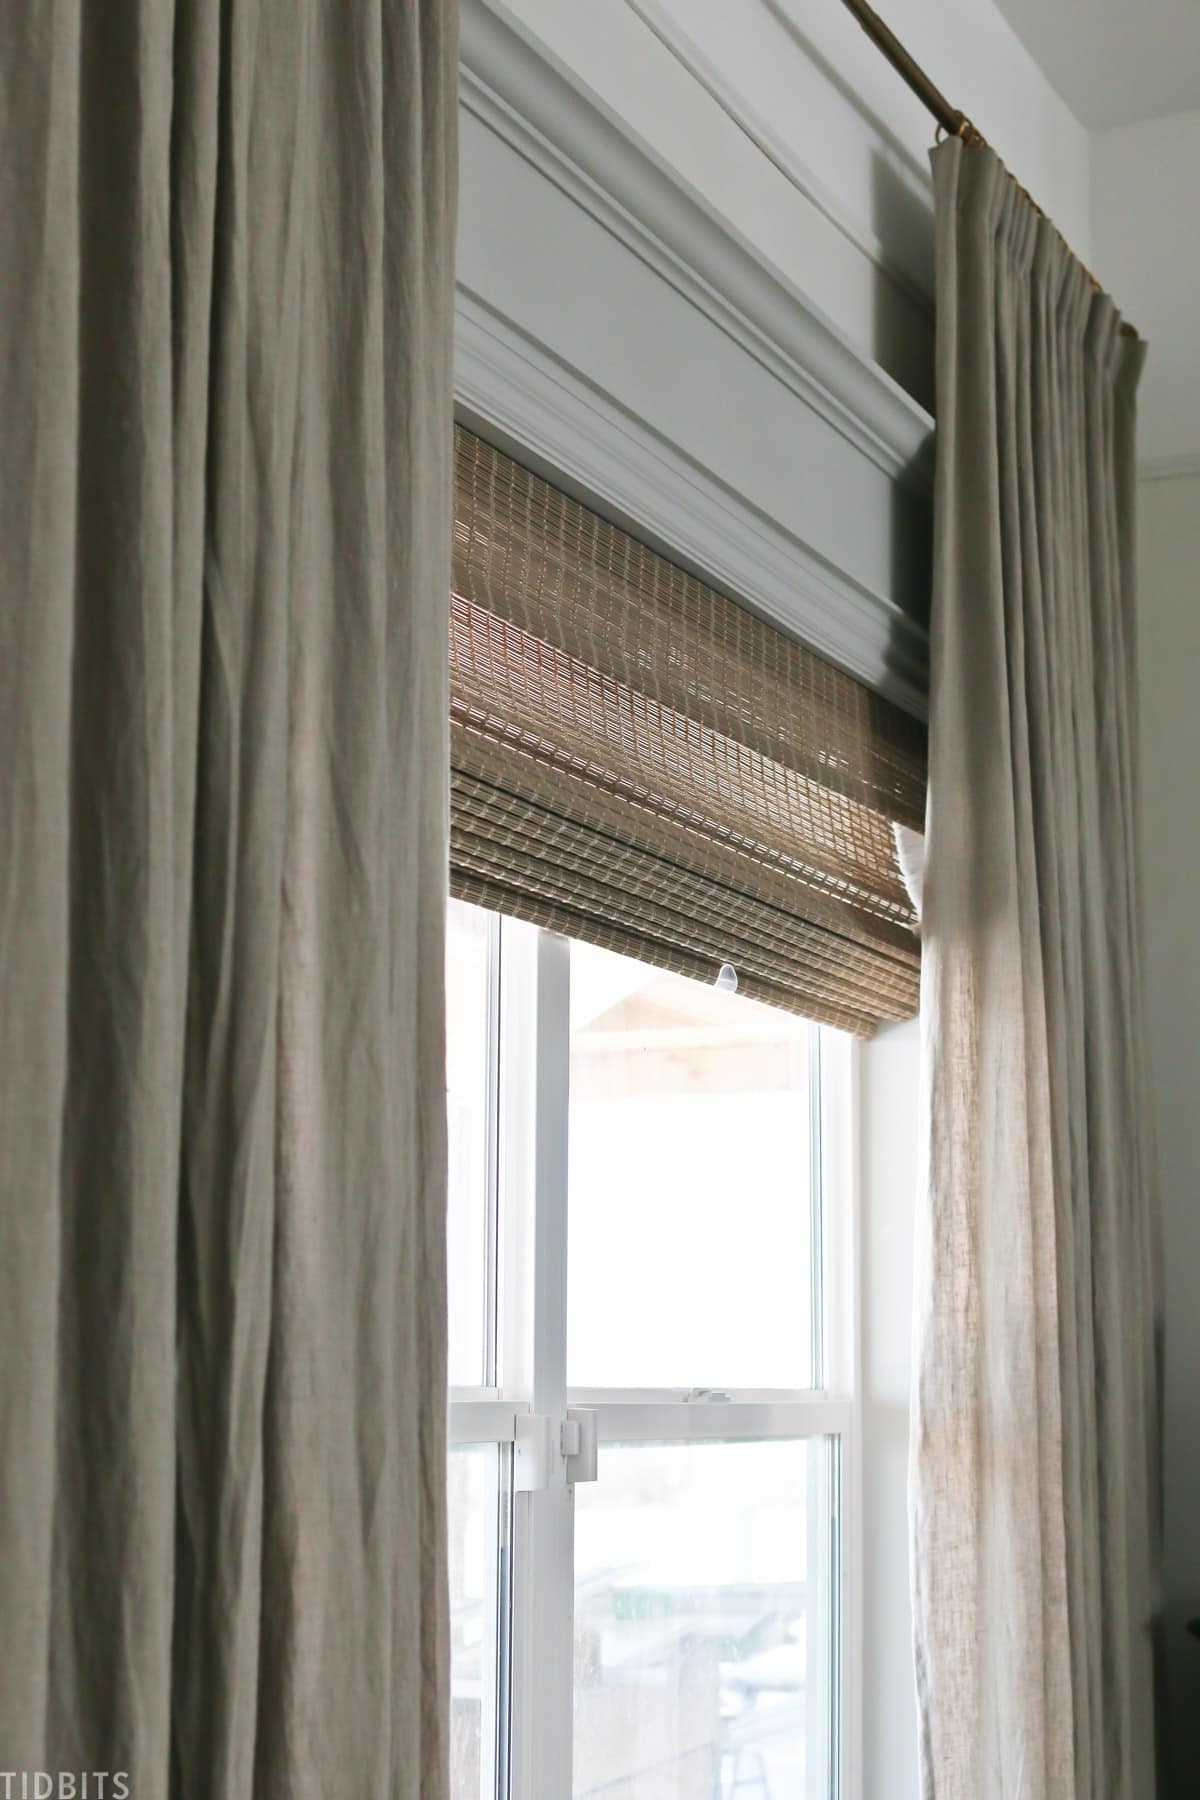 Linen curtains and textured shades